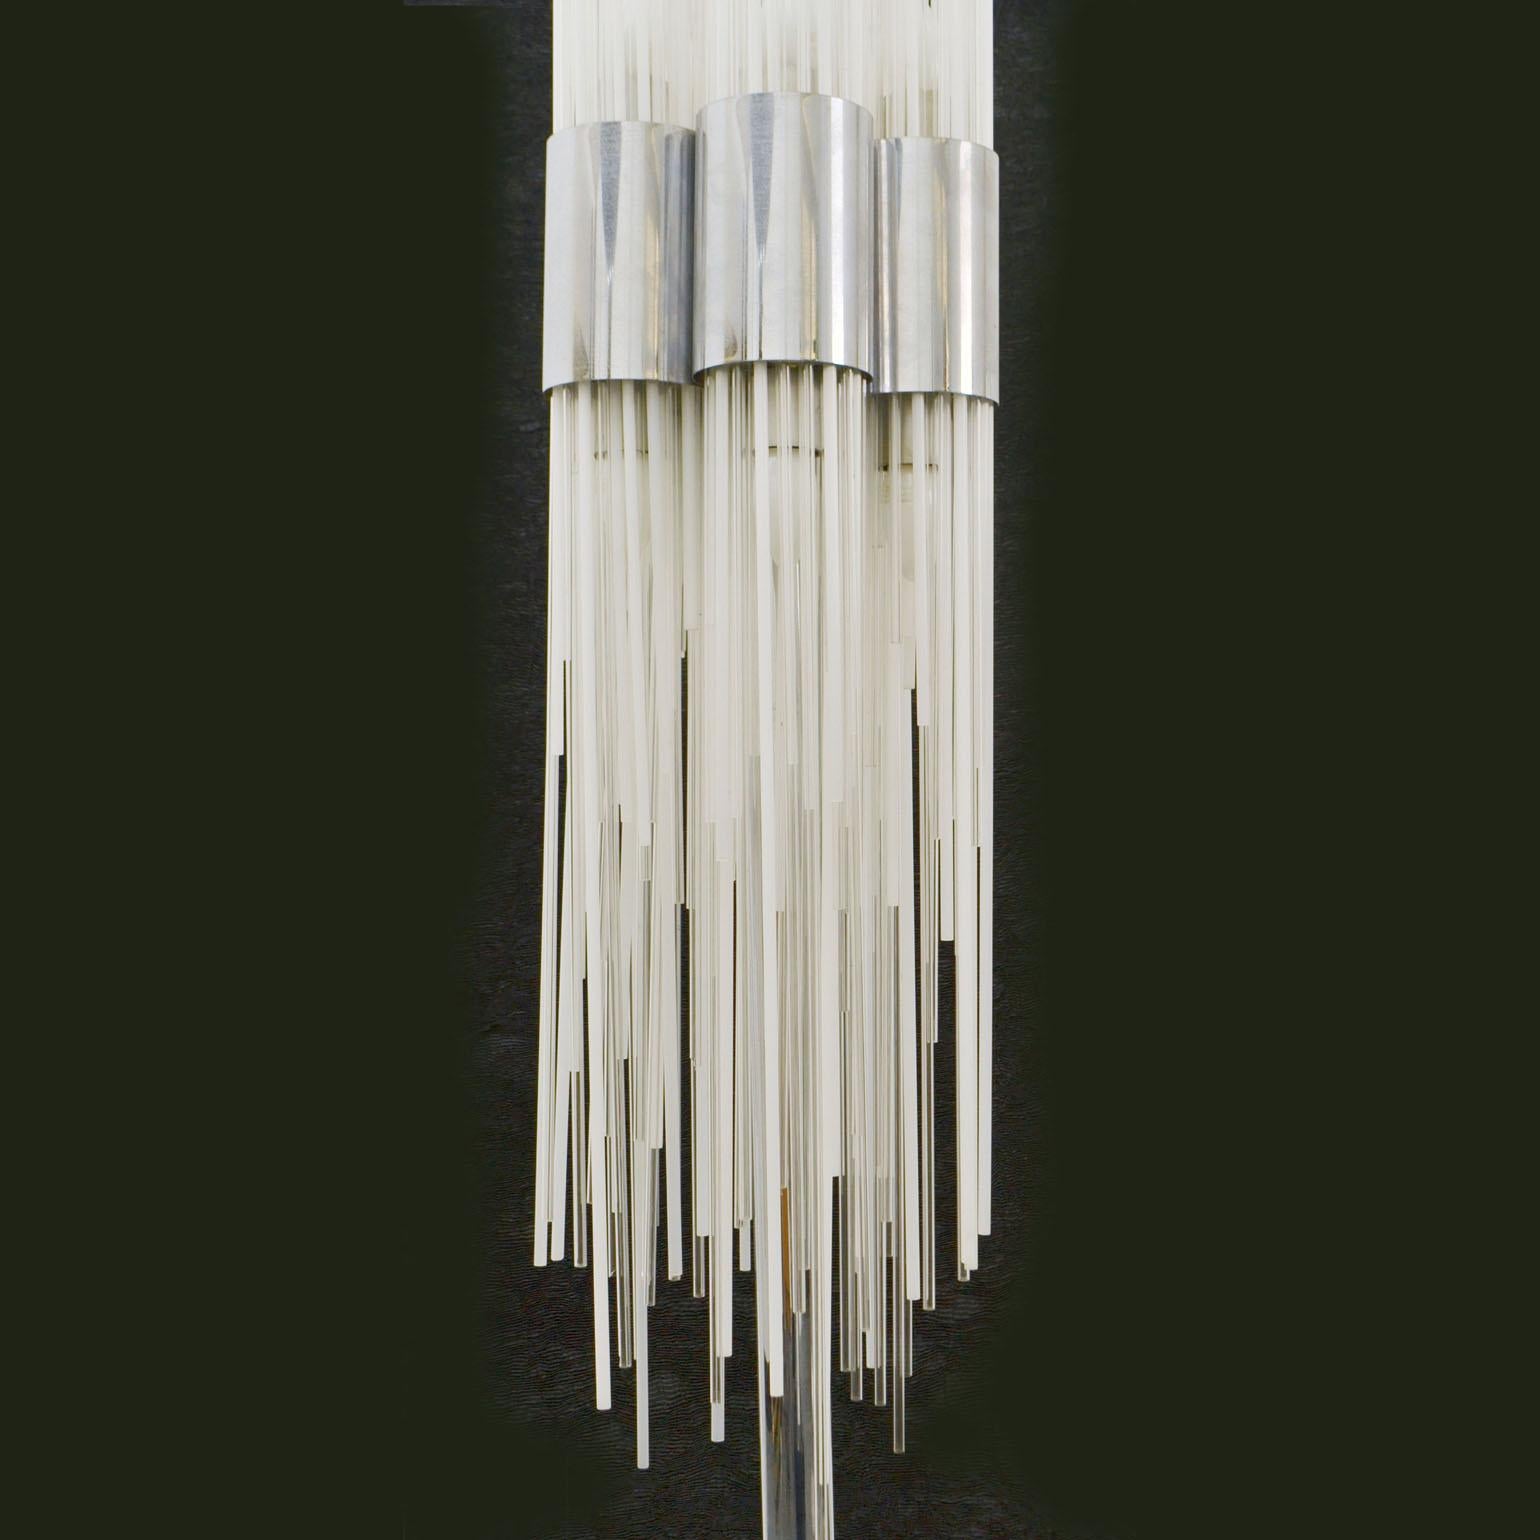 Reeded Glass Sculptural Art Floor Lamp in Reed Glass Rods on Chrome Stand In Italy 1960's  For Sale